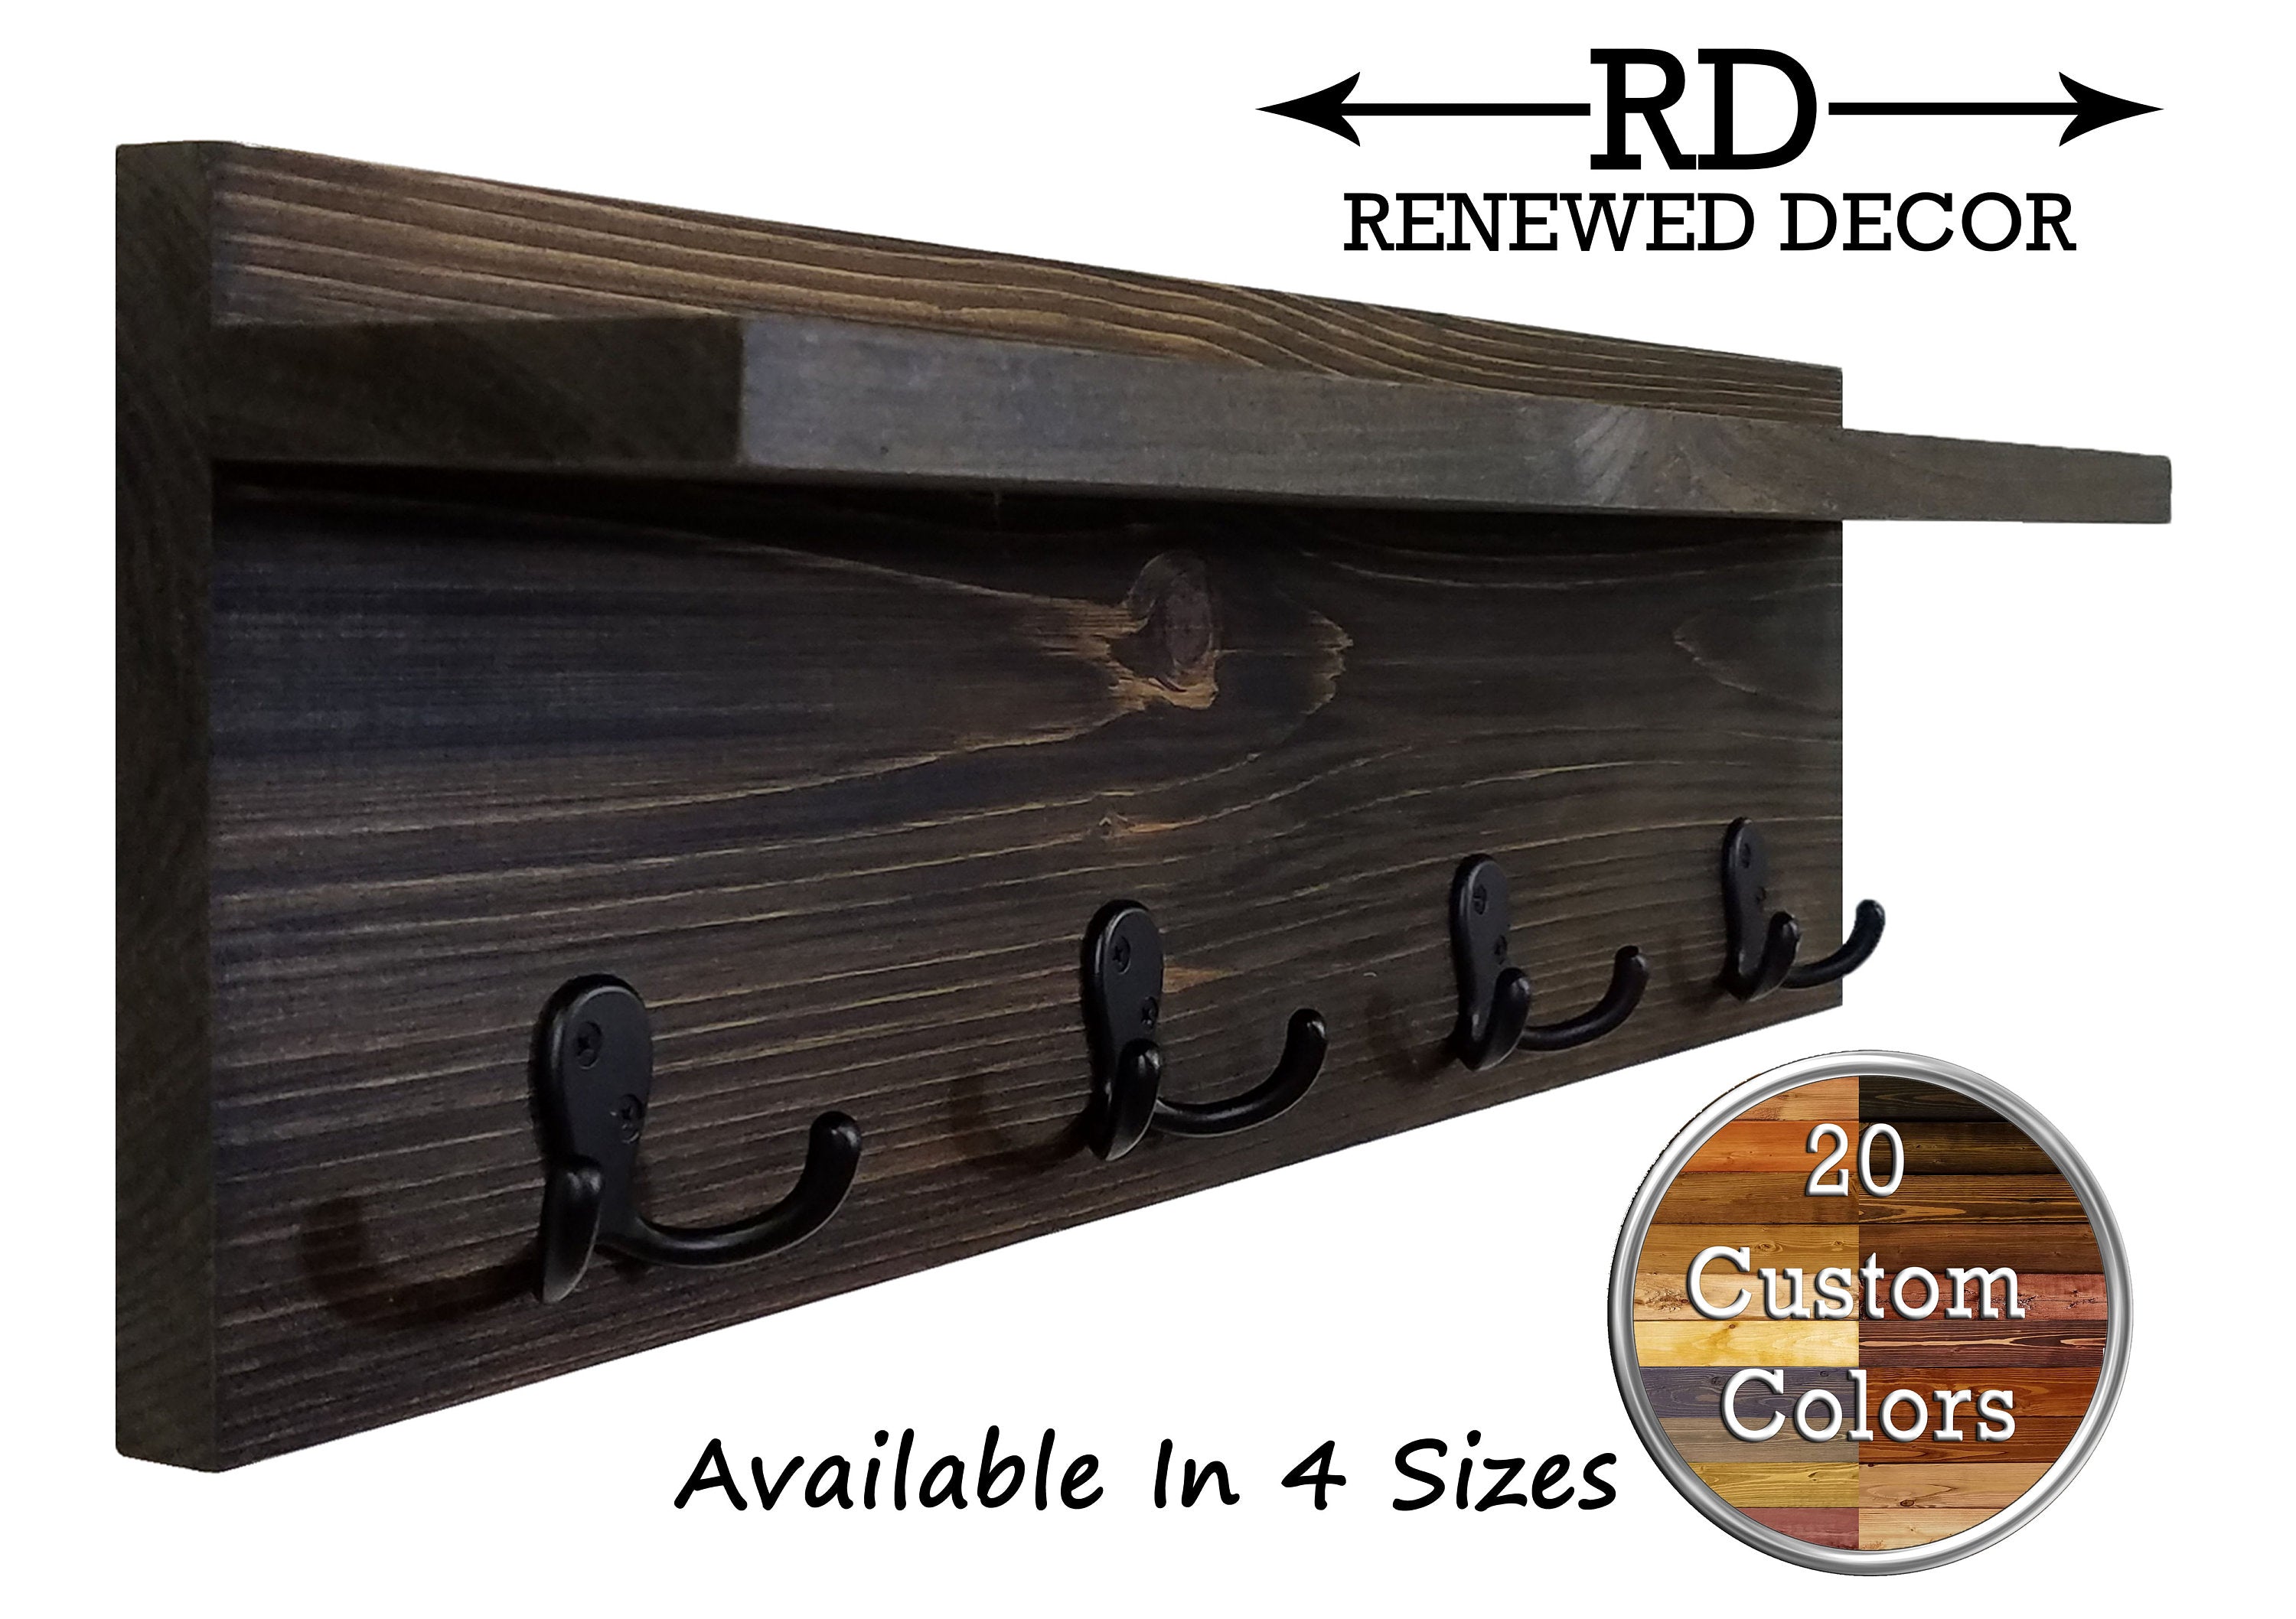 Modern Rustic Wall Shelf with Double Hooks, Handmade in the USA